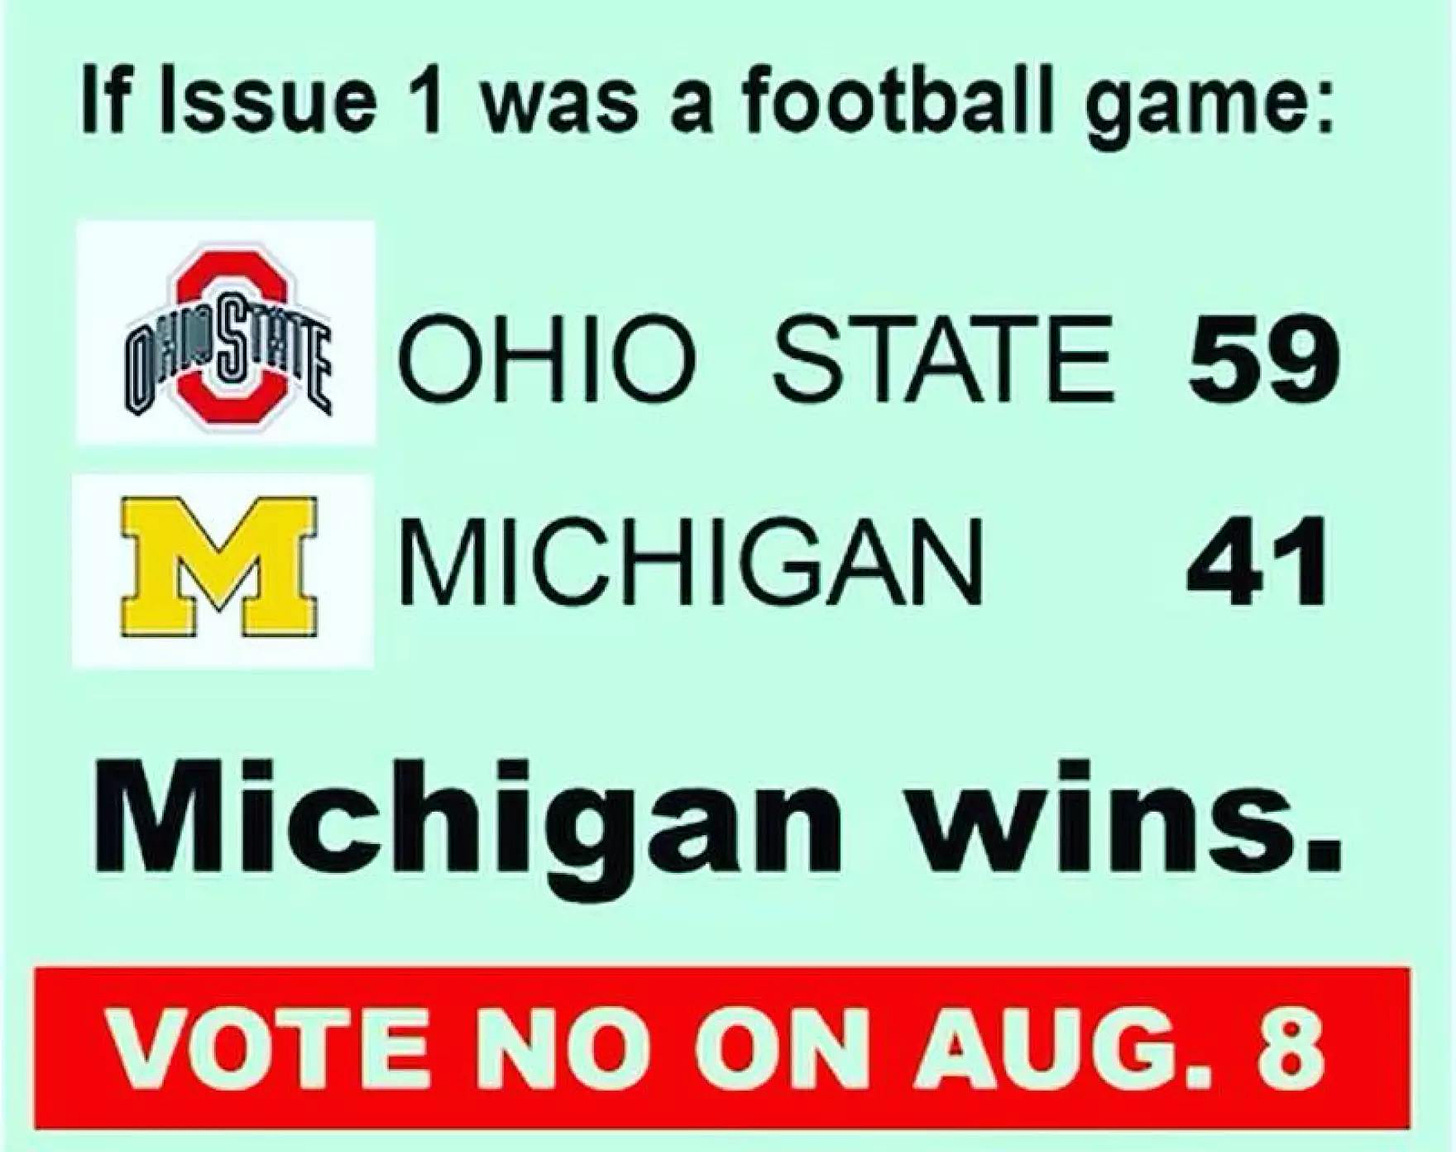 May be an image of football and text that says 'If Issue 1 was a football game: OHOSTAITE OHIO STATE 59 M MICHIGAN 41 Michigan wins. VOTE NO ON AUG.'